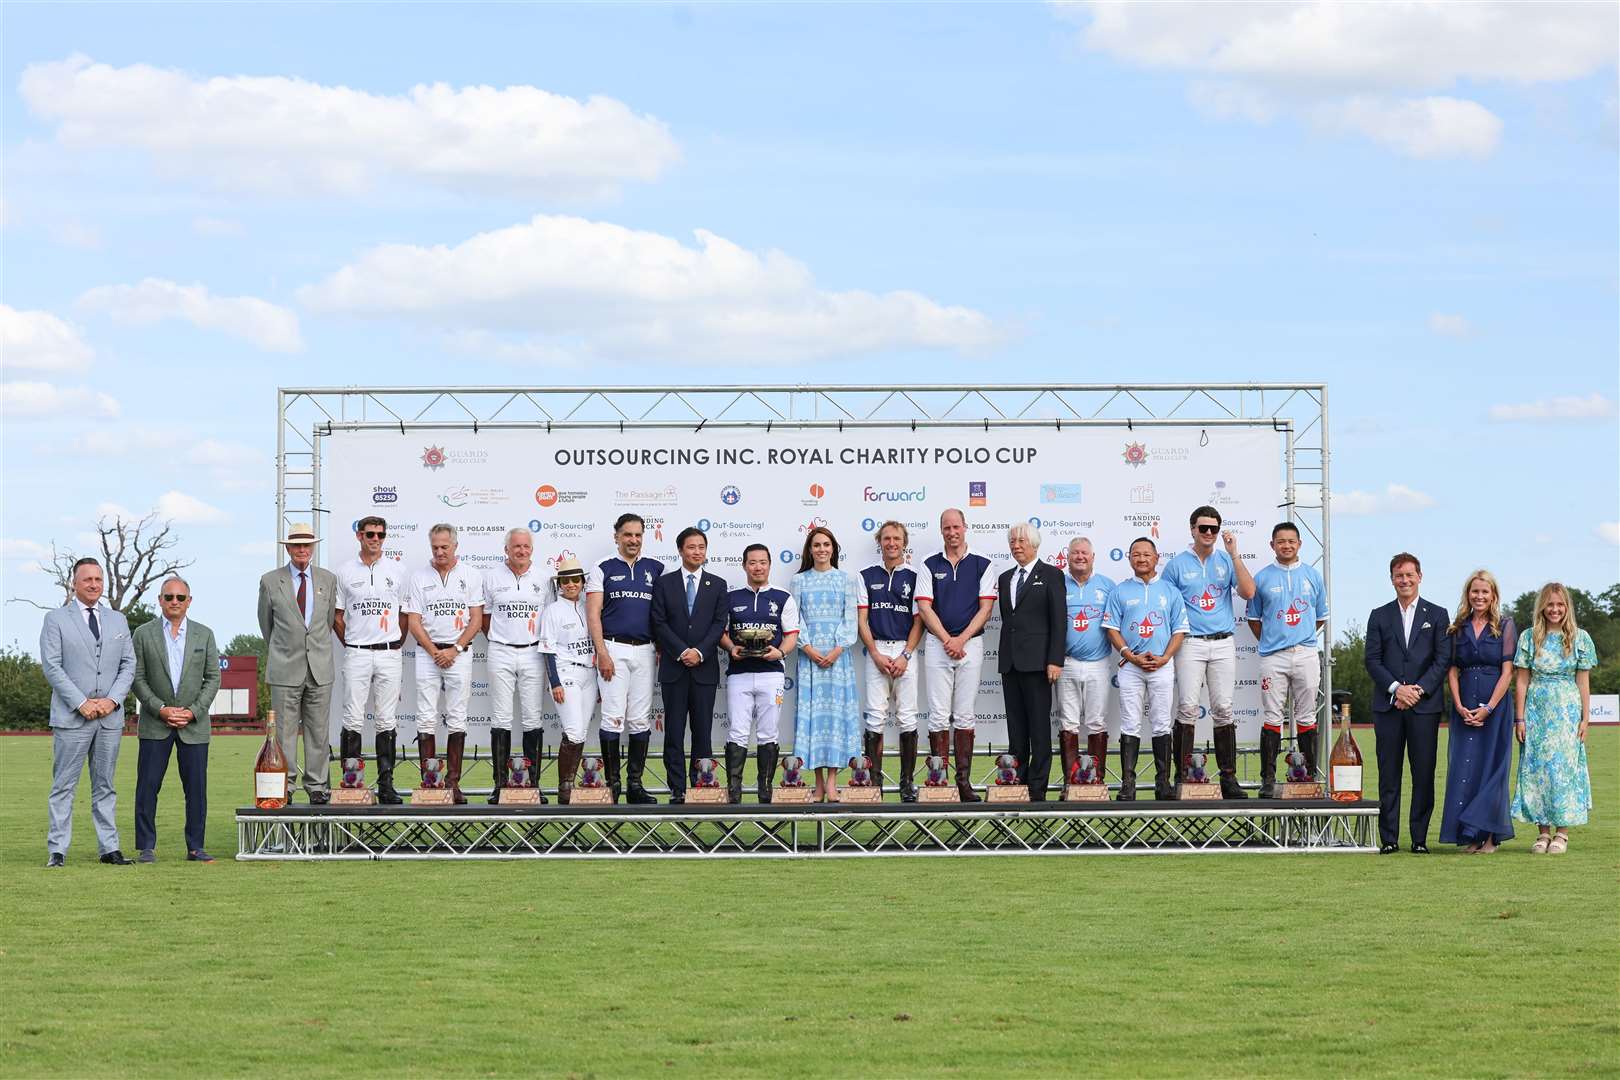 Outsourcing Inc Royal Charity Polo Cup